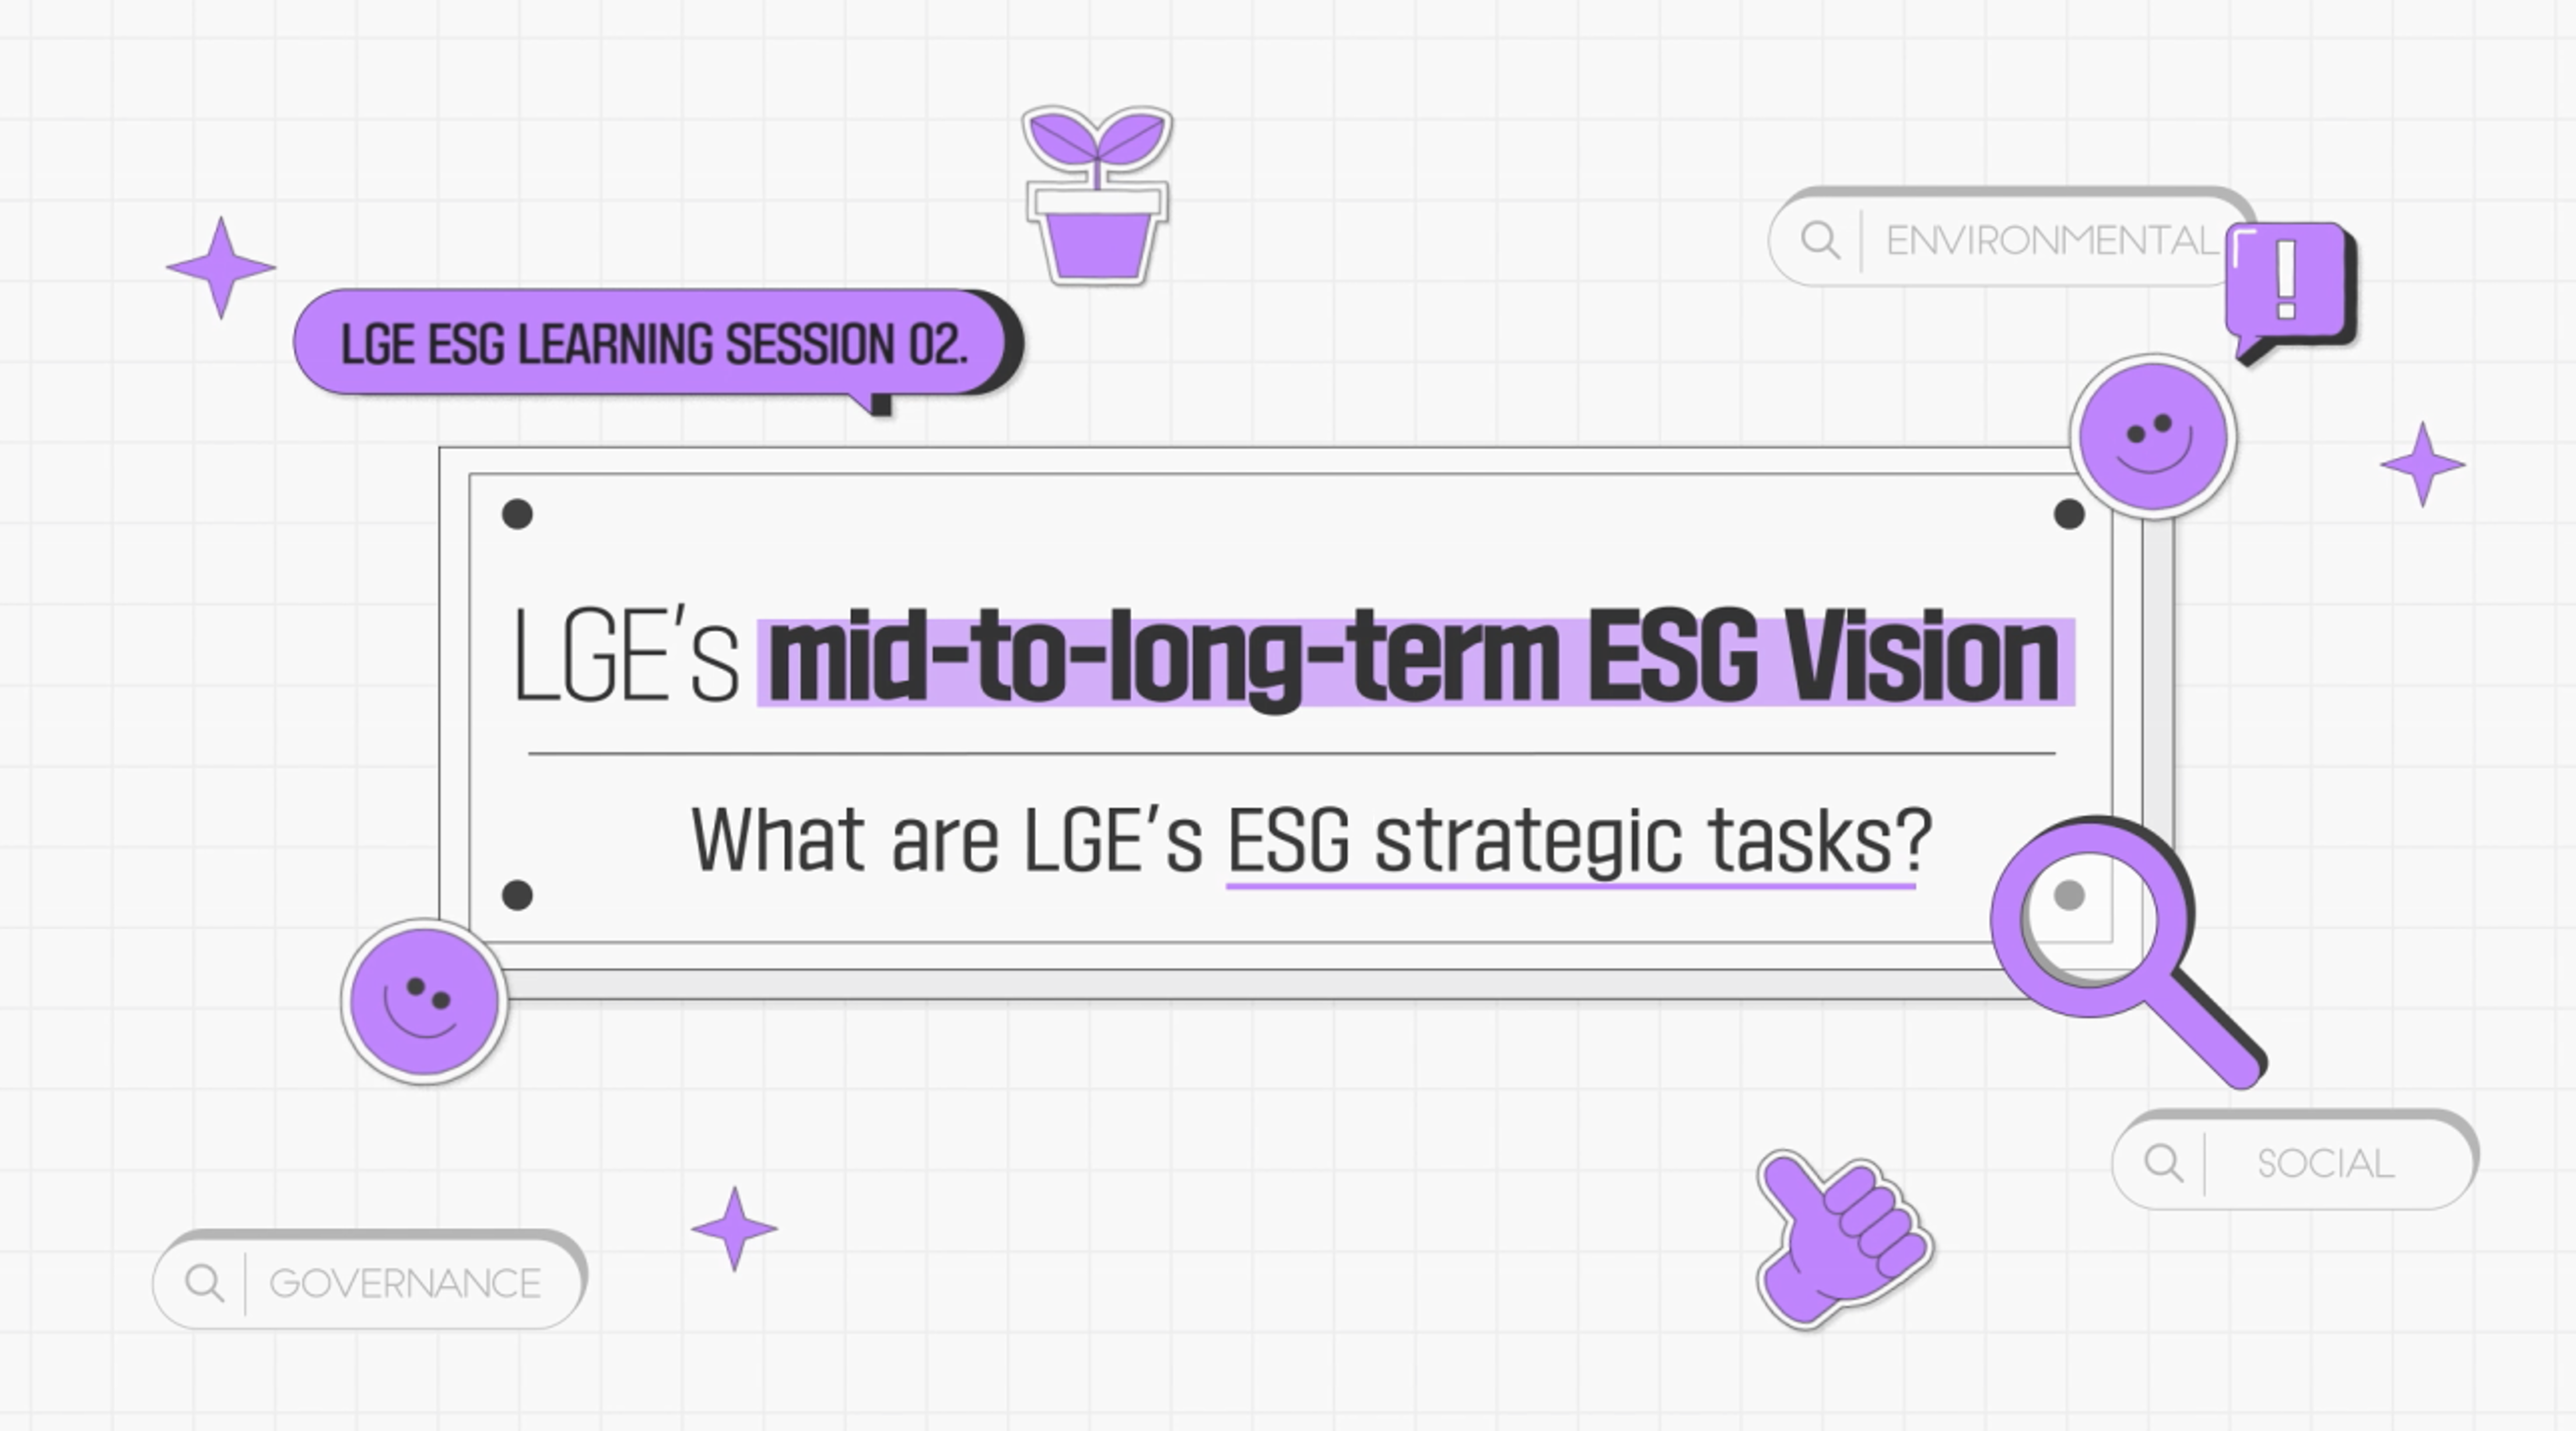 Image depicting the second lesson of LG's ESG training program for its employees with the phrases "LGE's mid-to-long-term ESG Vision" and "What are LGE's ESG strategic tasks?"